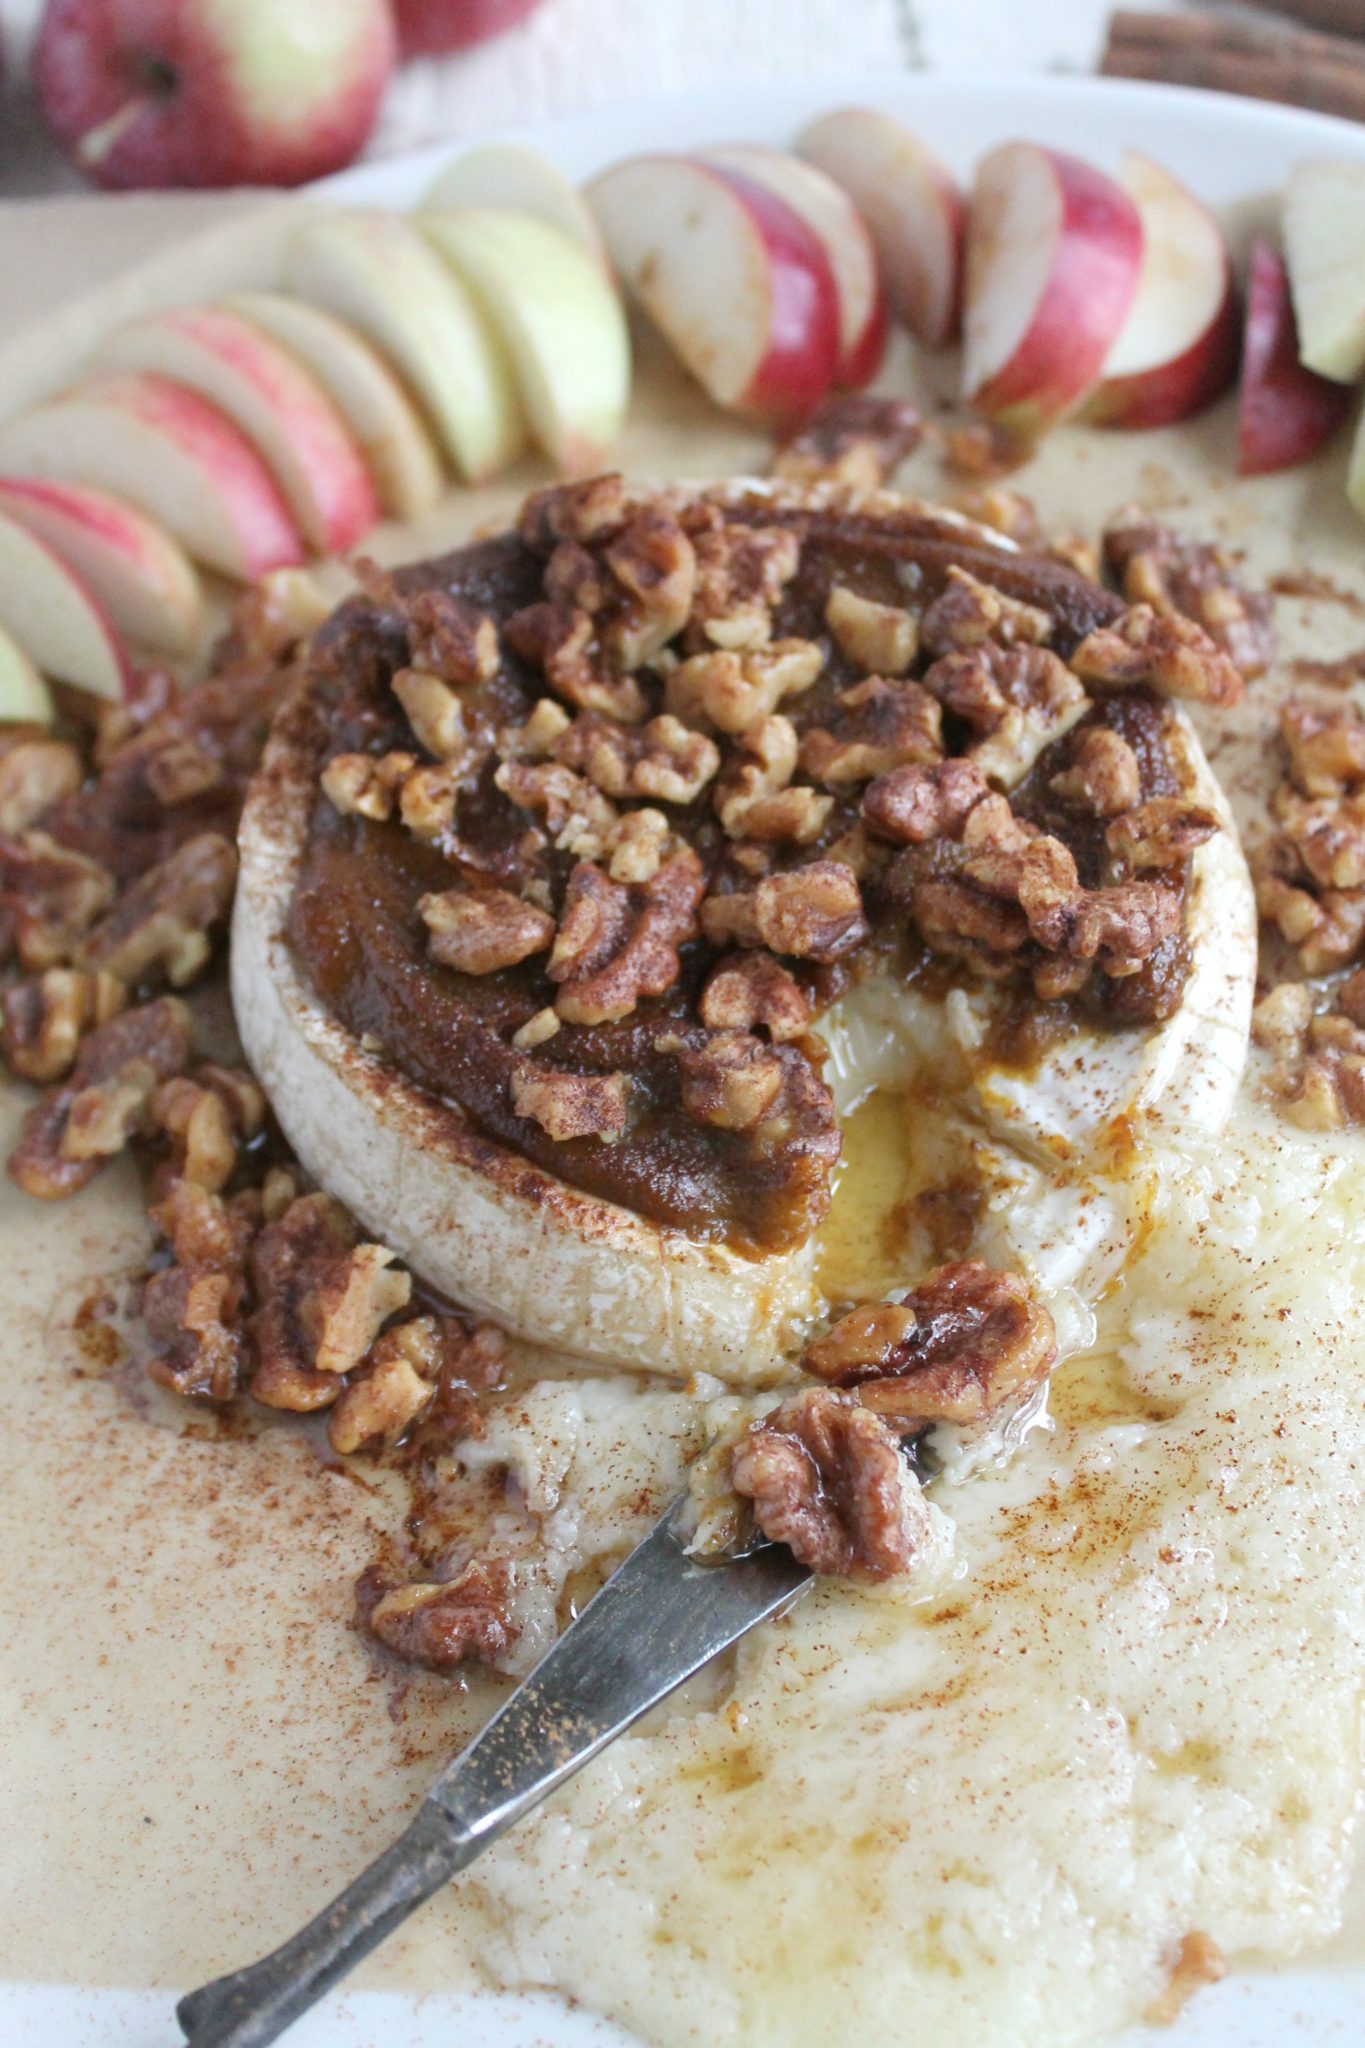 Baked Brie with Pumpkin Butter and Walnuts via JennySheaRawn.com